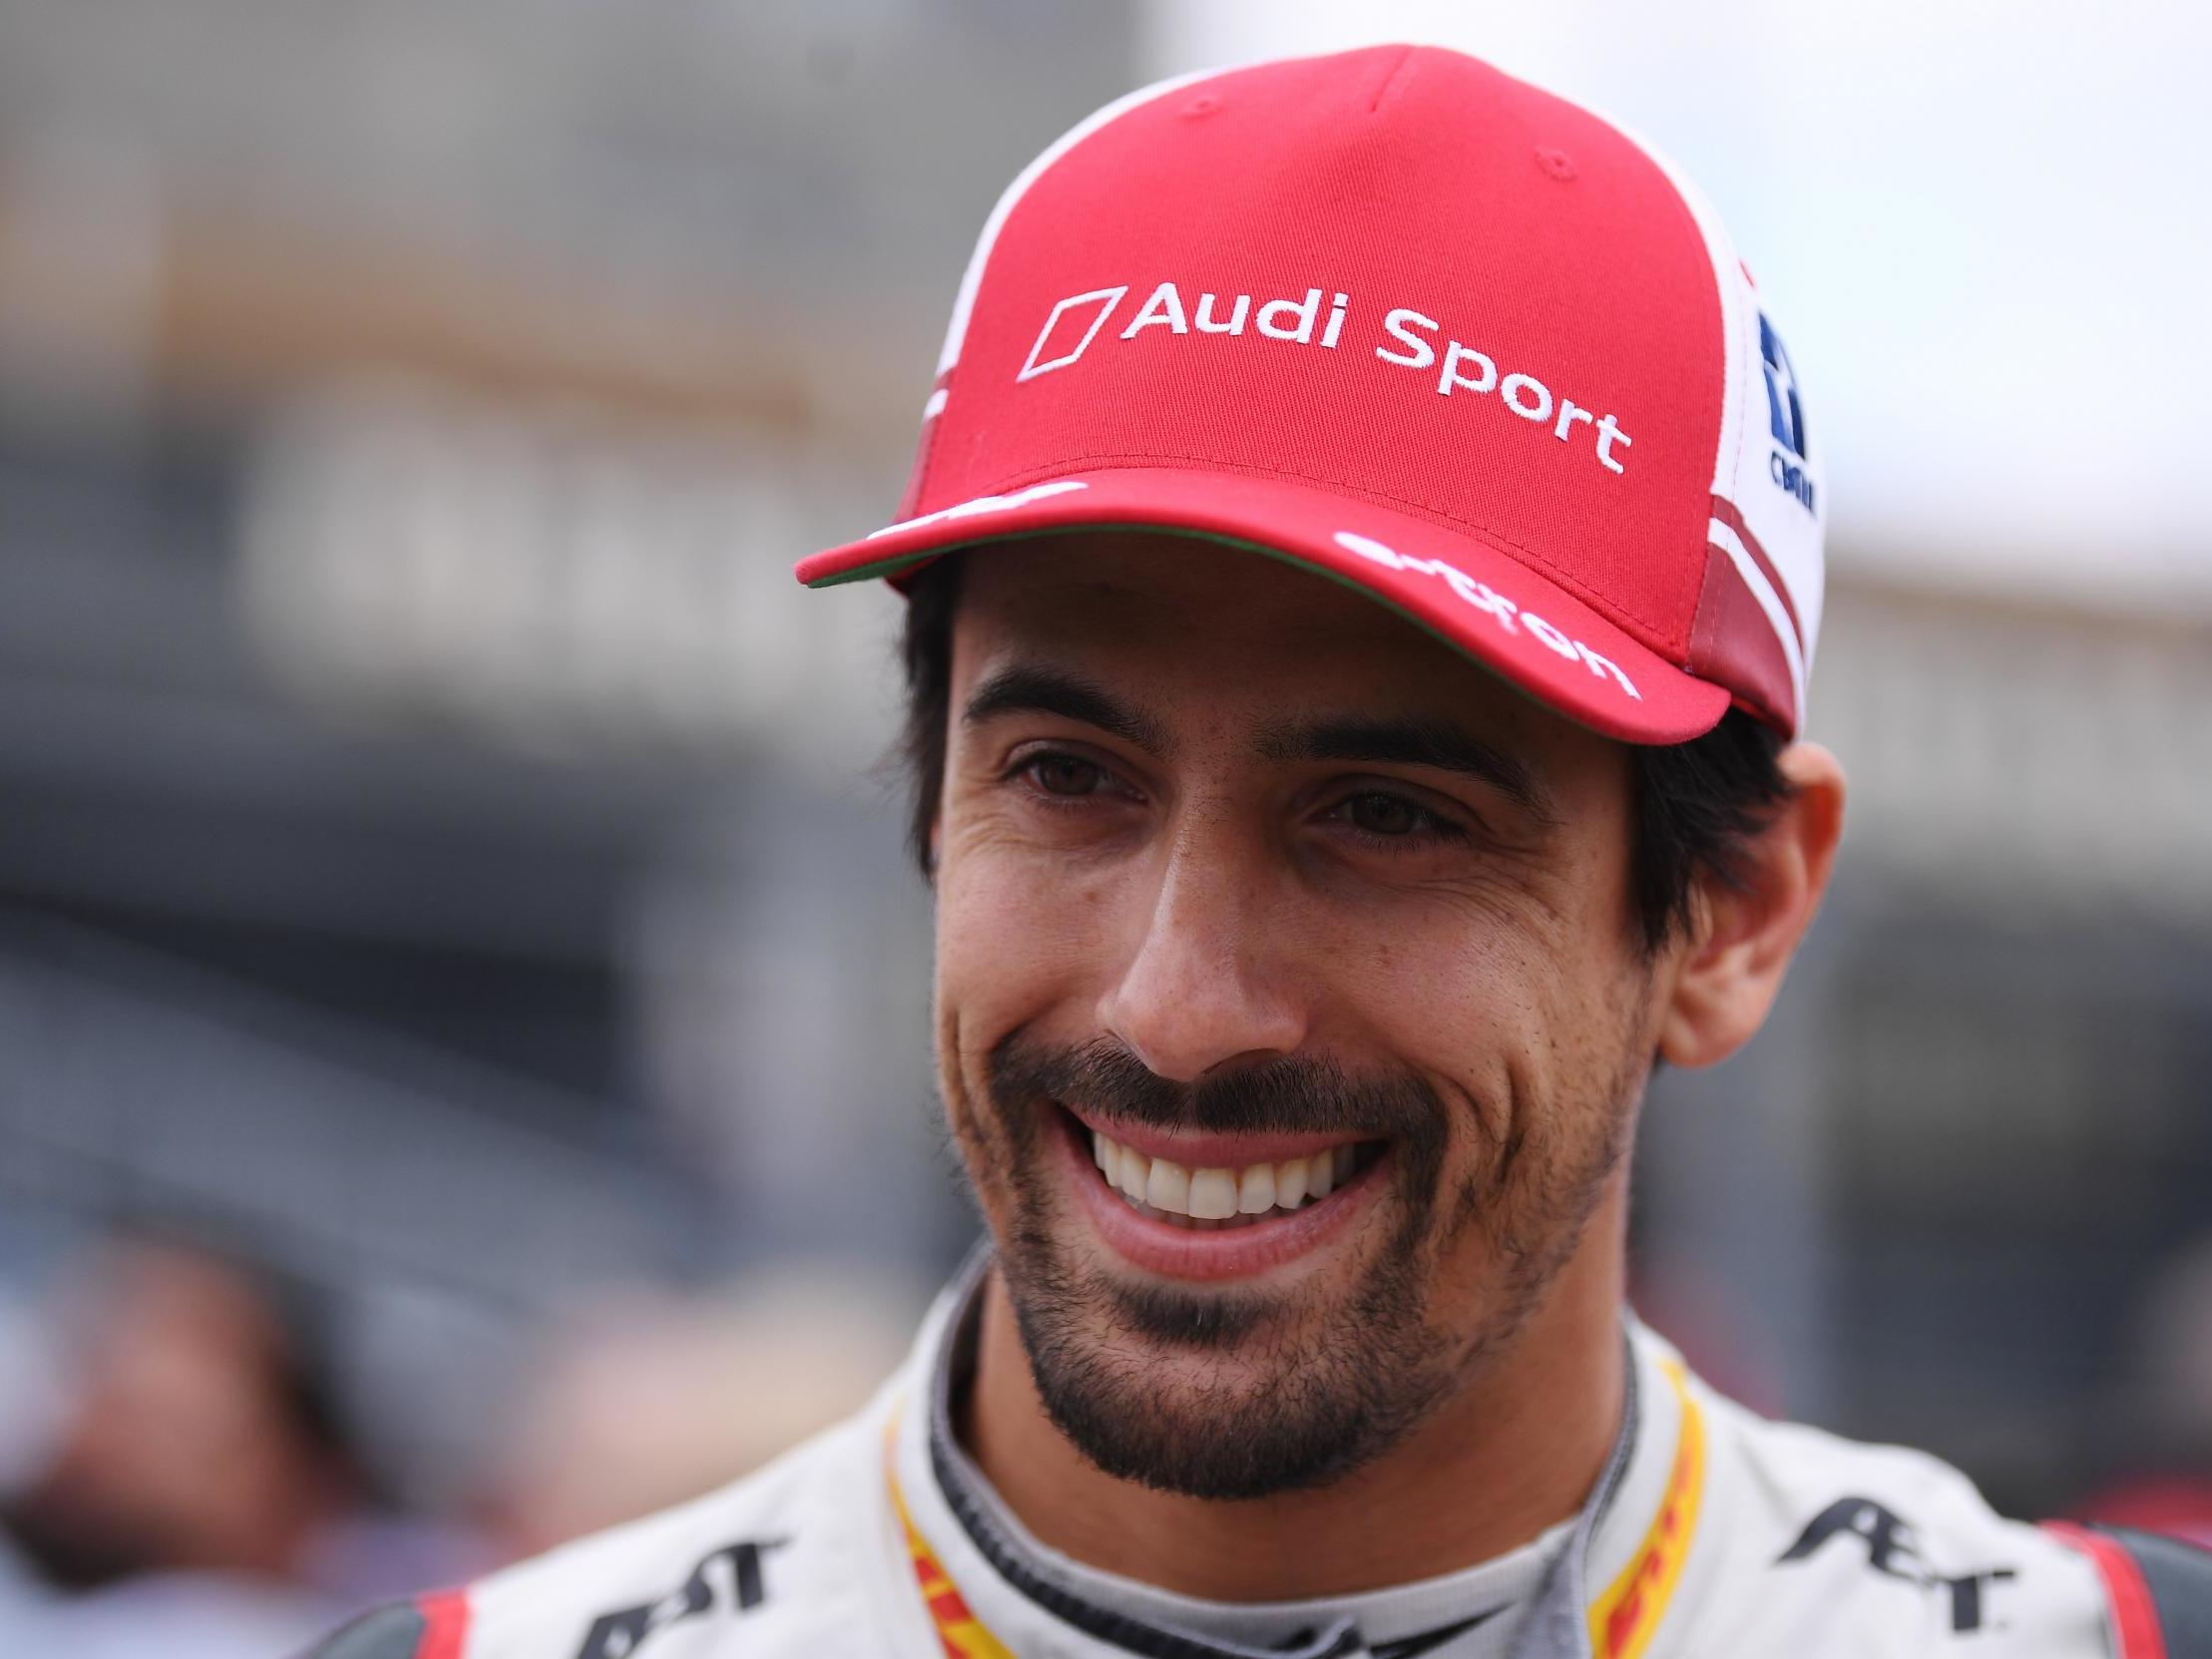 Always looking forward, always innovating, always venturing into life’s uncharted territory, Lucas di Grassi isn't your average racer